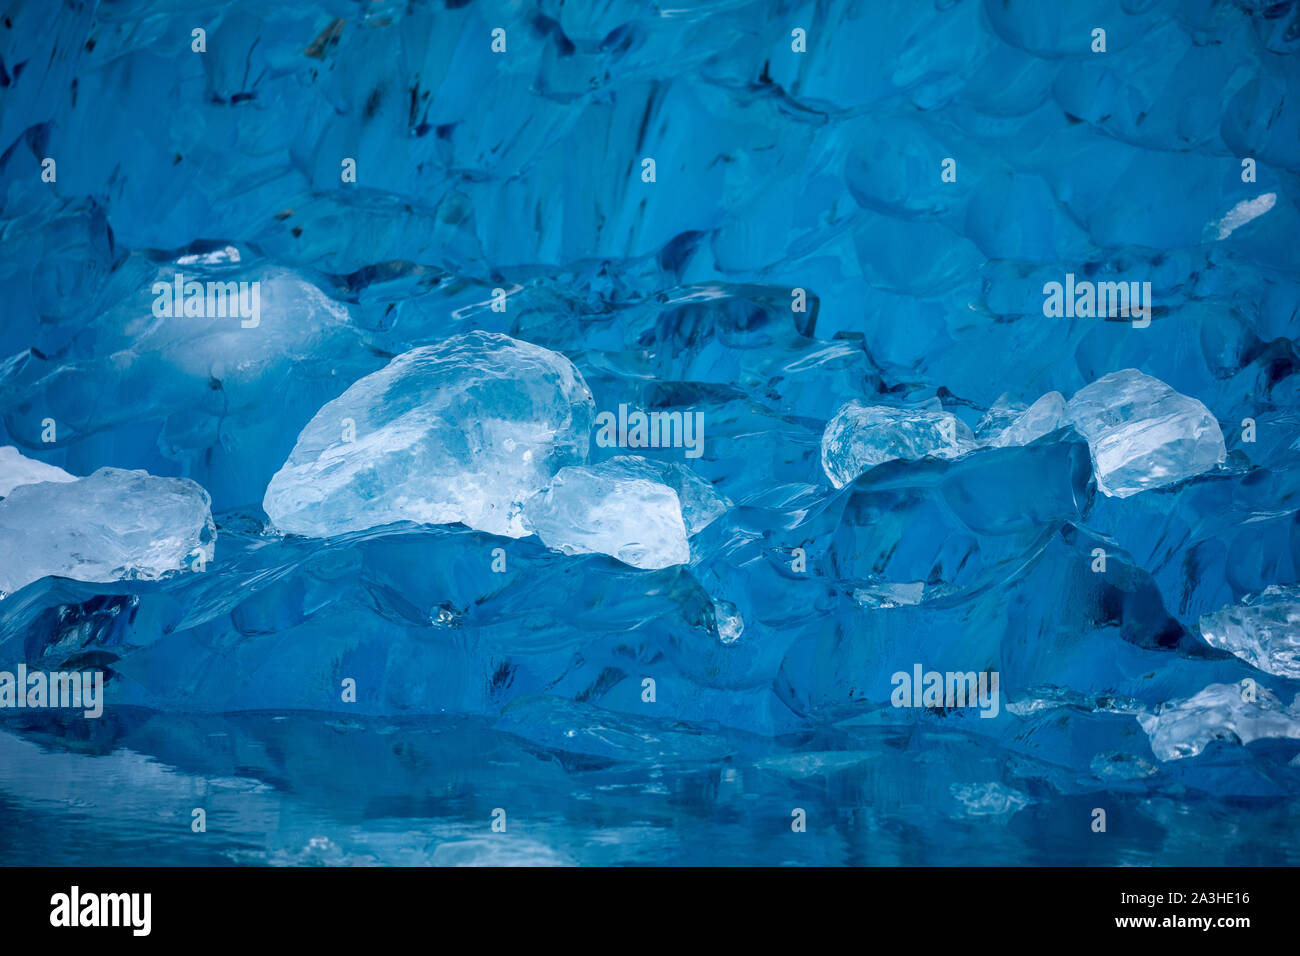 USA, Alaska, Close-up view of deep blue iceberg floating near calving face of LeConte Glacier east of Petersburg Stock Photo